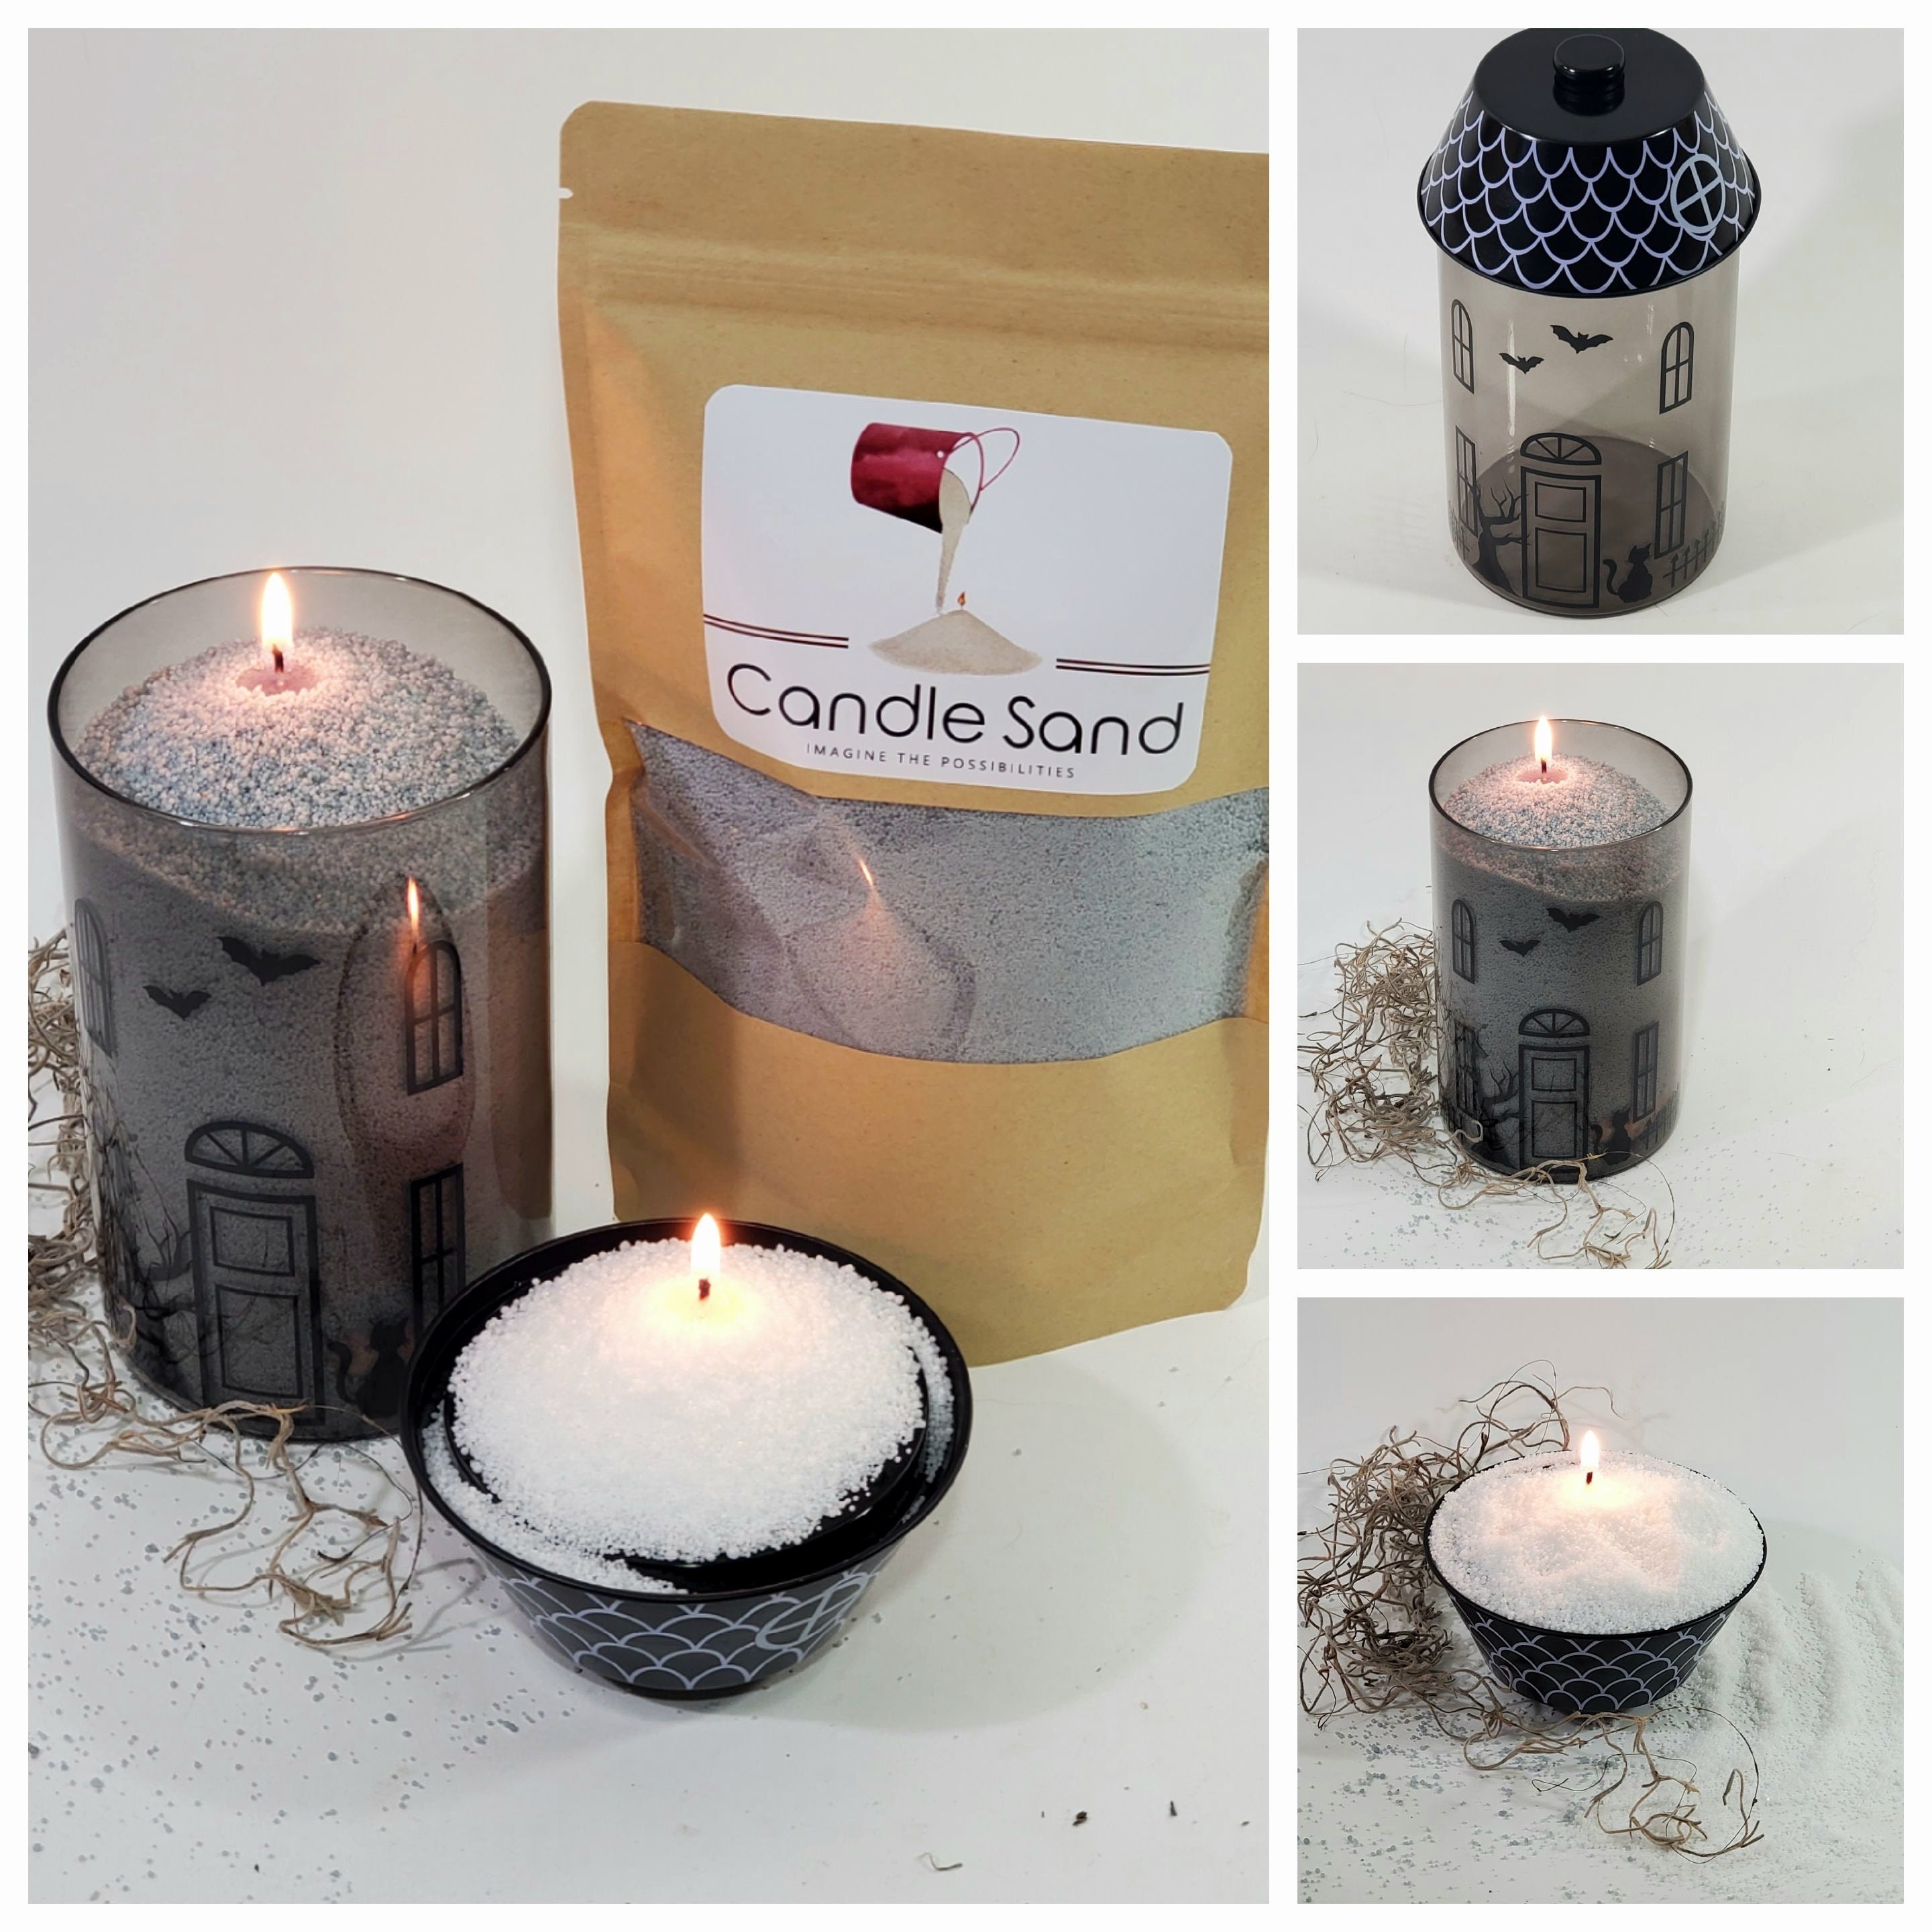  Sand Candle > Make Your Own Sand Candles Pour on Surface-  Floats on Water- Candle Making Supplies Personalized Candles - 1 lb Bag (2  Wicks Included) Beach (Natural)